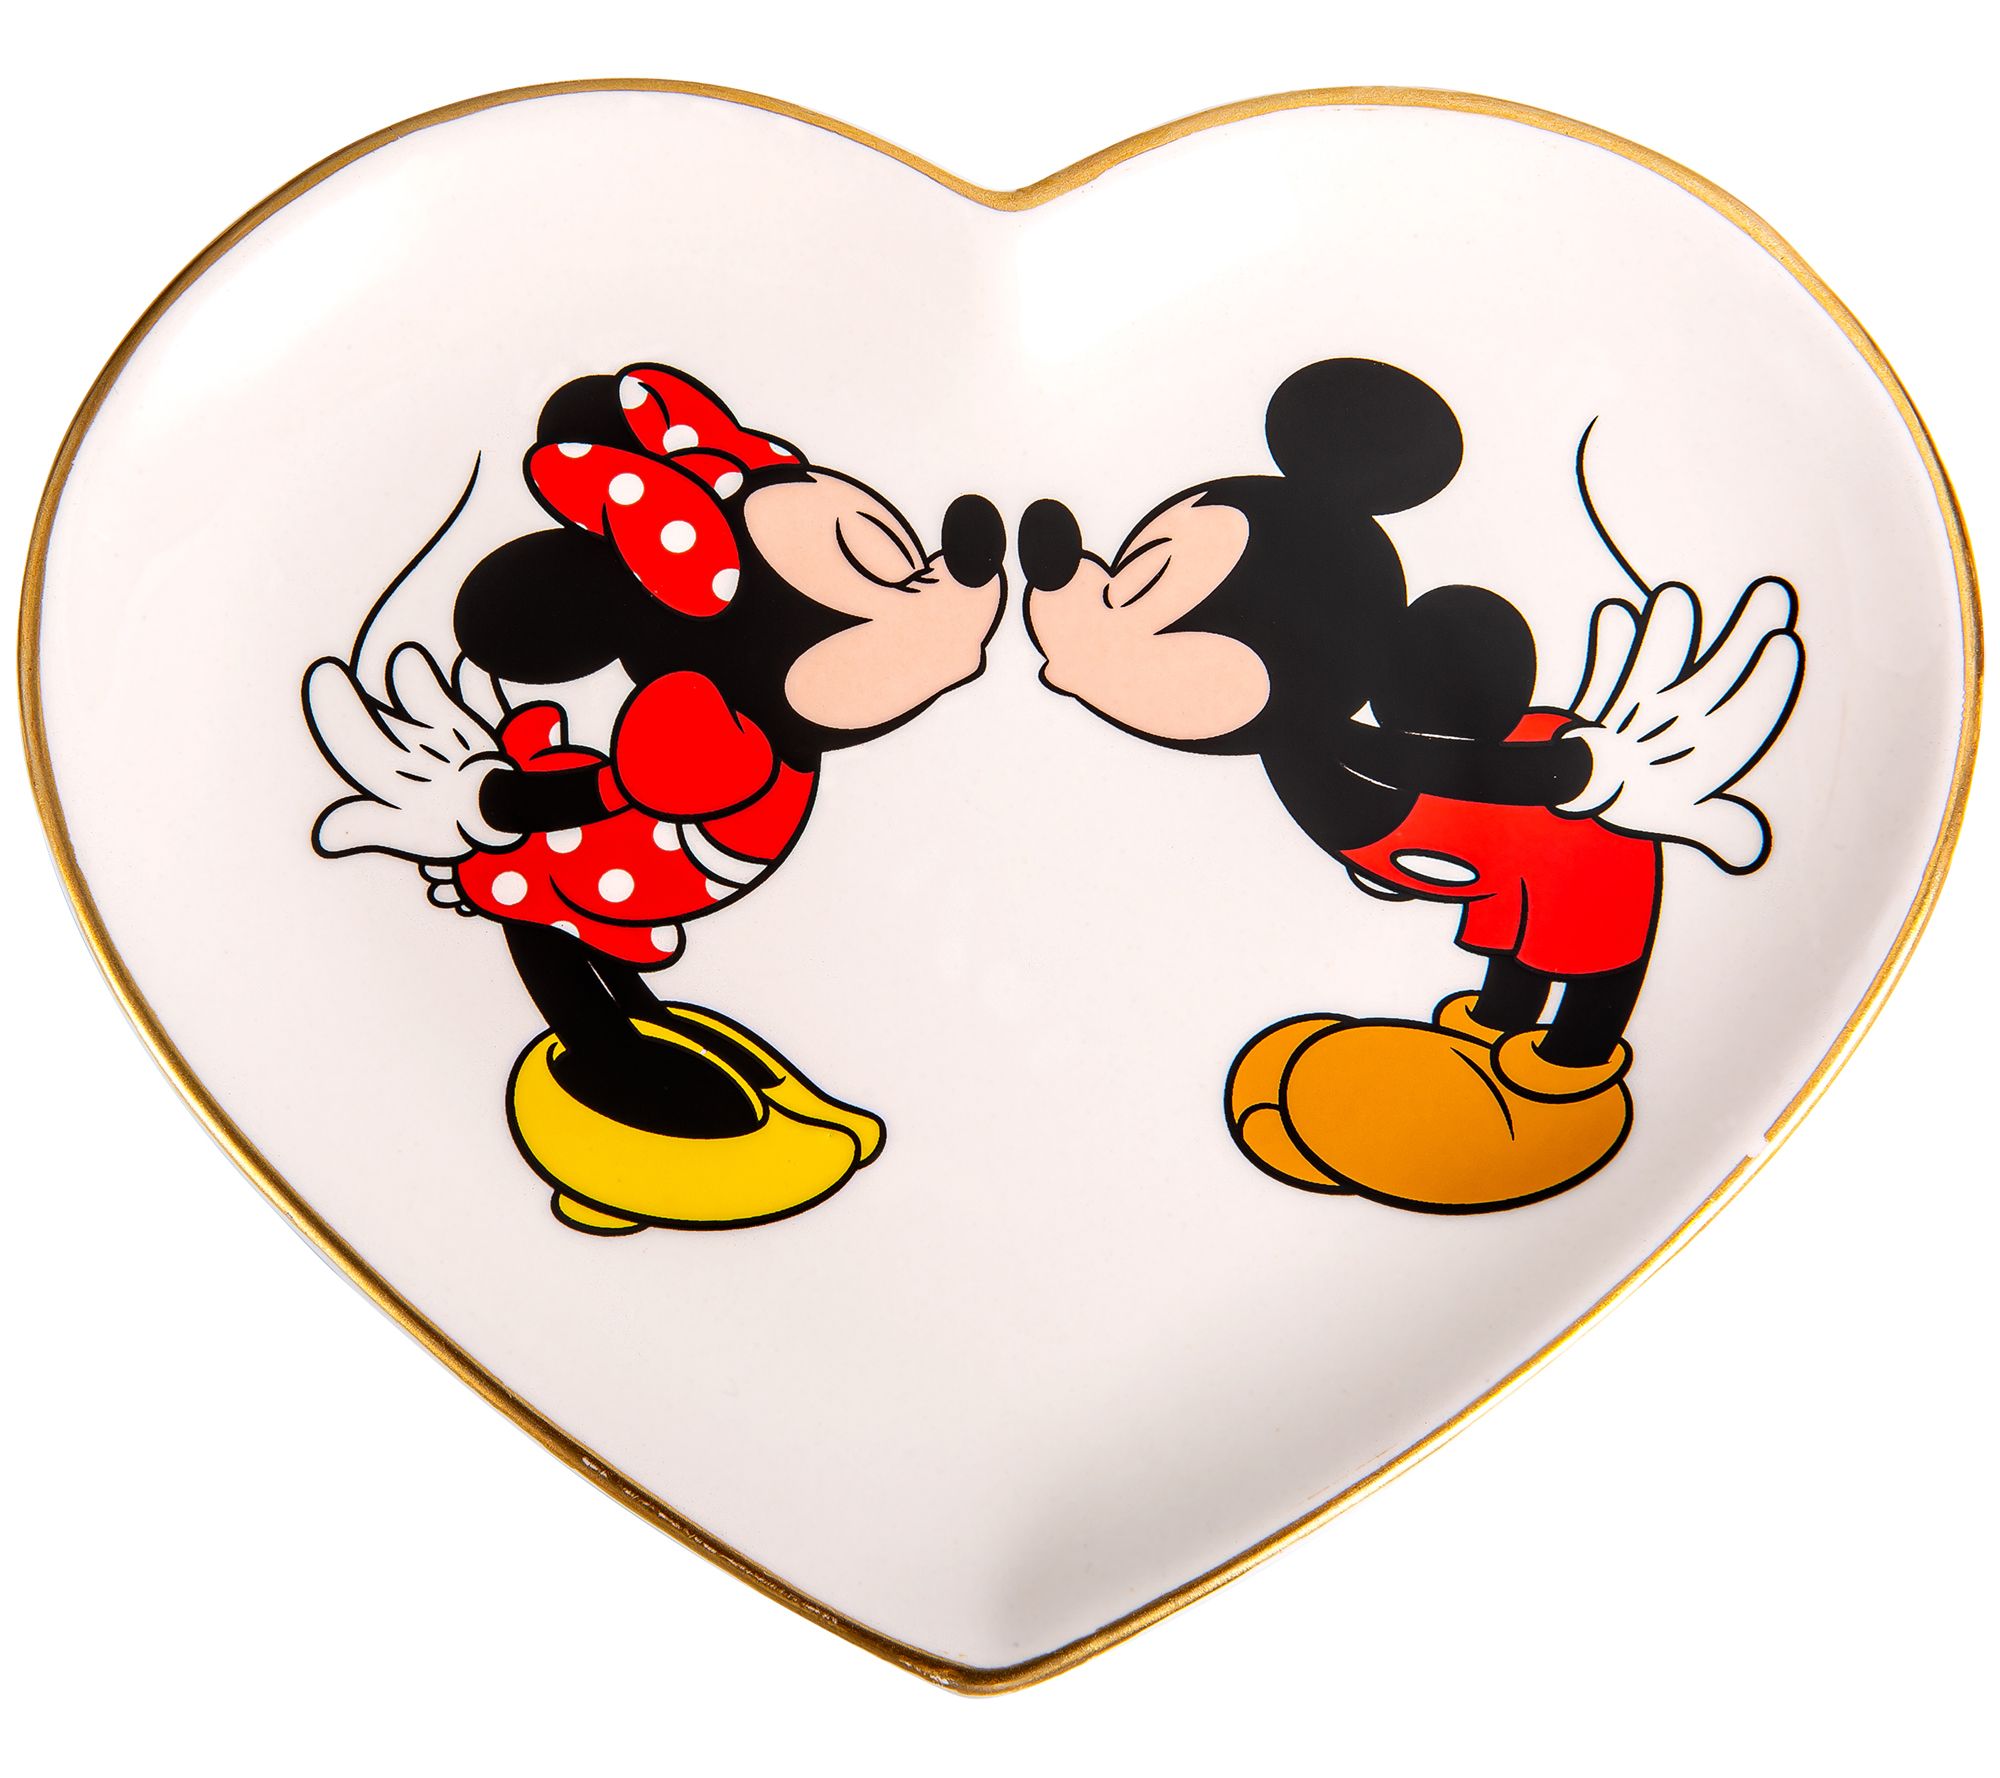 Disney's Mickey Mouse & Minnie Mouse Heart Trin ket Tray 